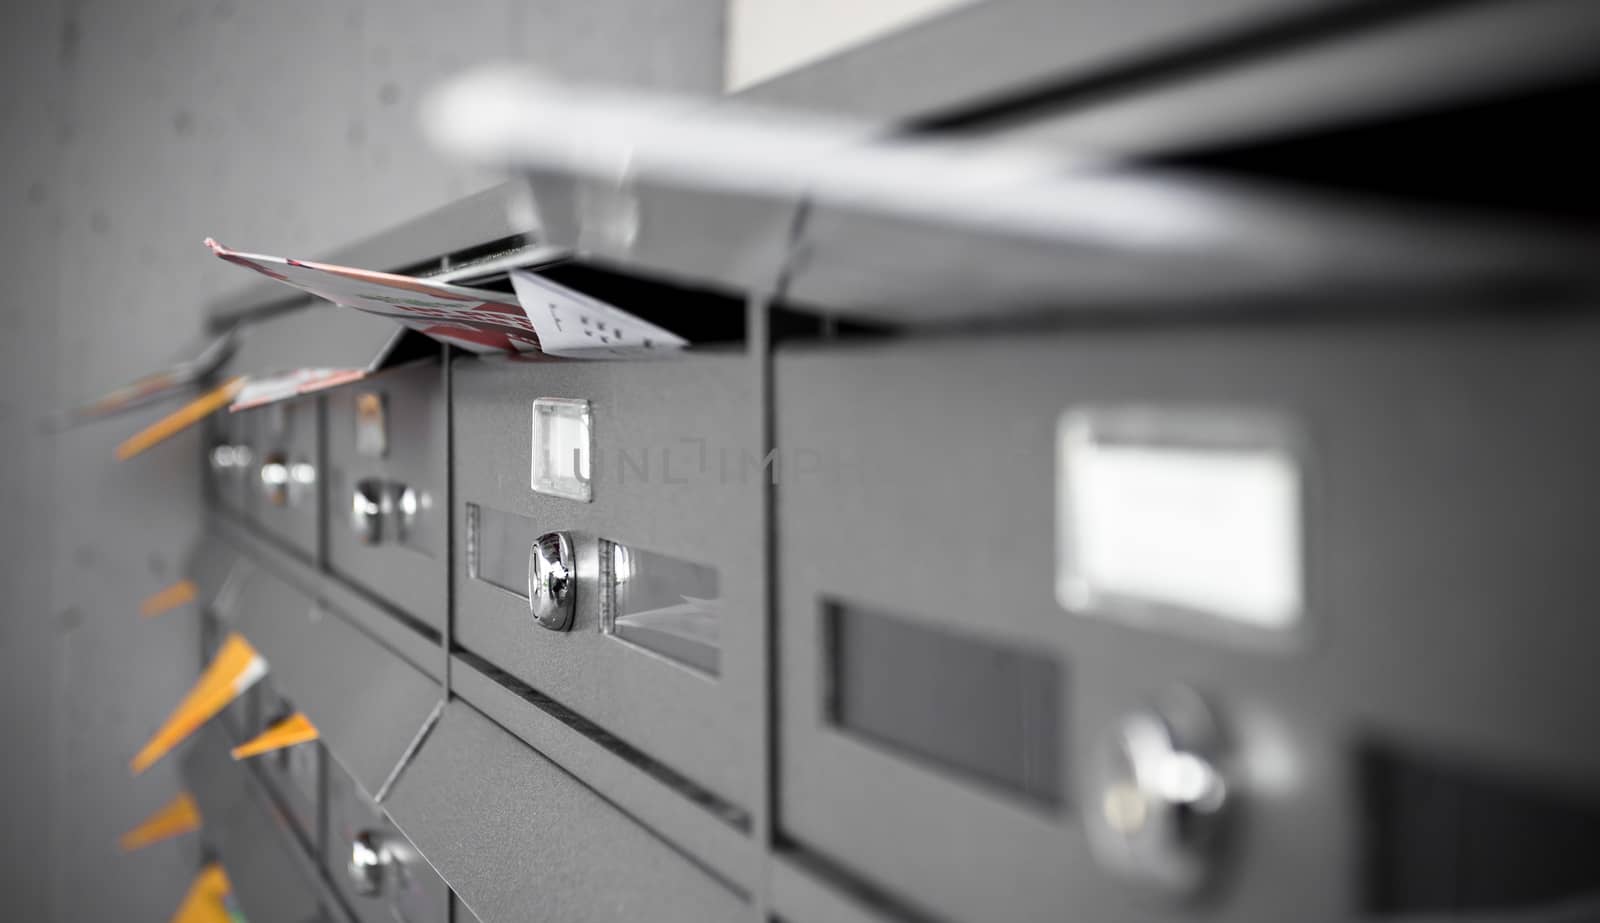 Mail boxes filled of leaflets and letters. Shallow DOF.